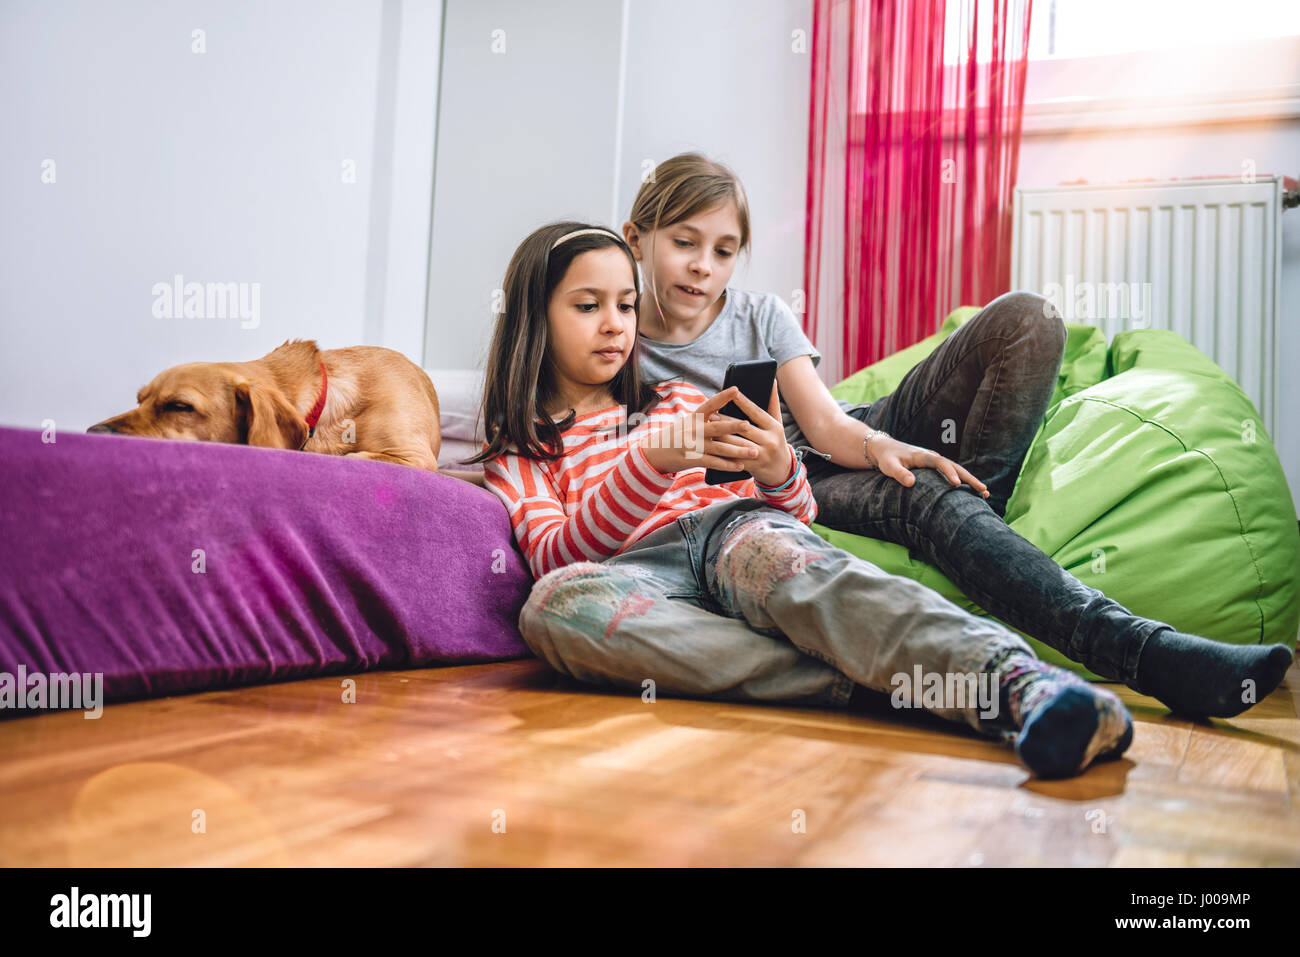 Two girls with small yellow dog sitting in the kids room and using smart phone Stock Photo